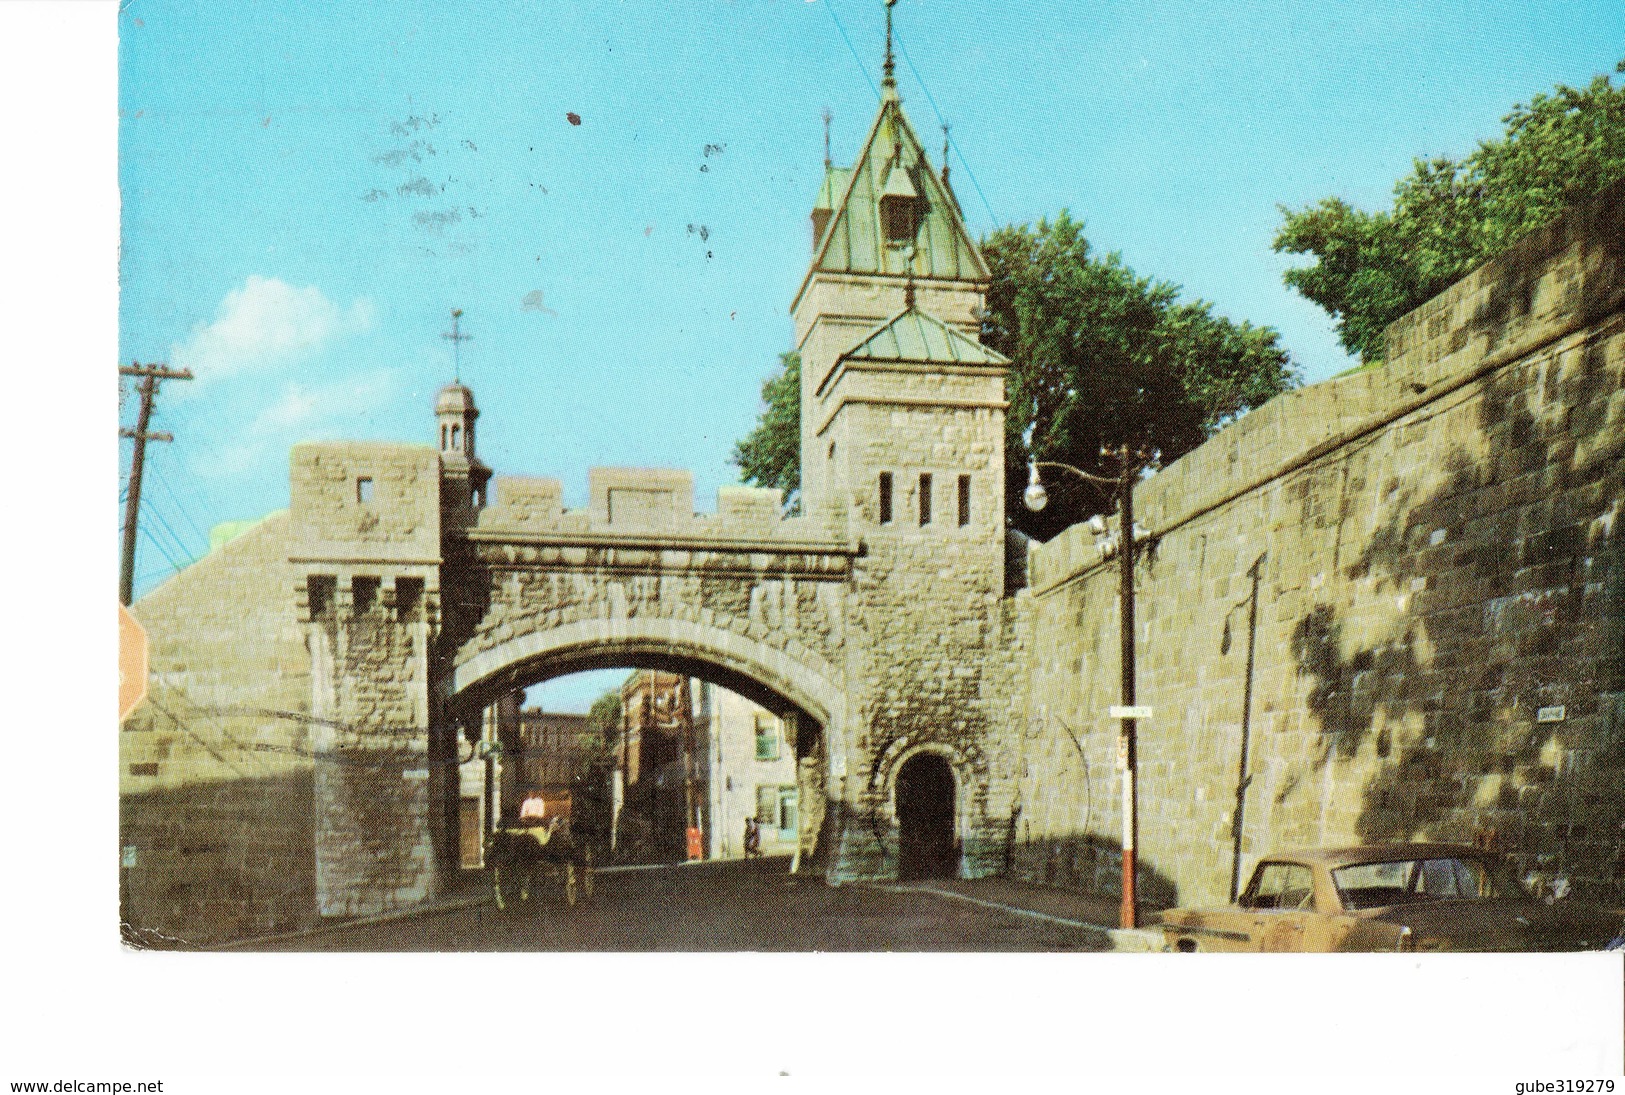 CANADA 1969   -POSTCARD- QUEBEC - MONTREAL - OLD WALL WITH TOWERS HALF SHINING MAILED 2 JUL 1969 POST 7287 - Québec – Les Portes